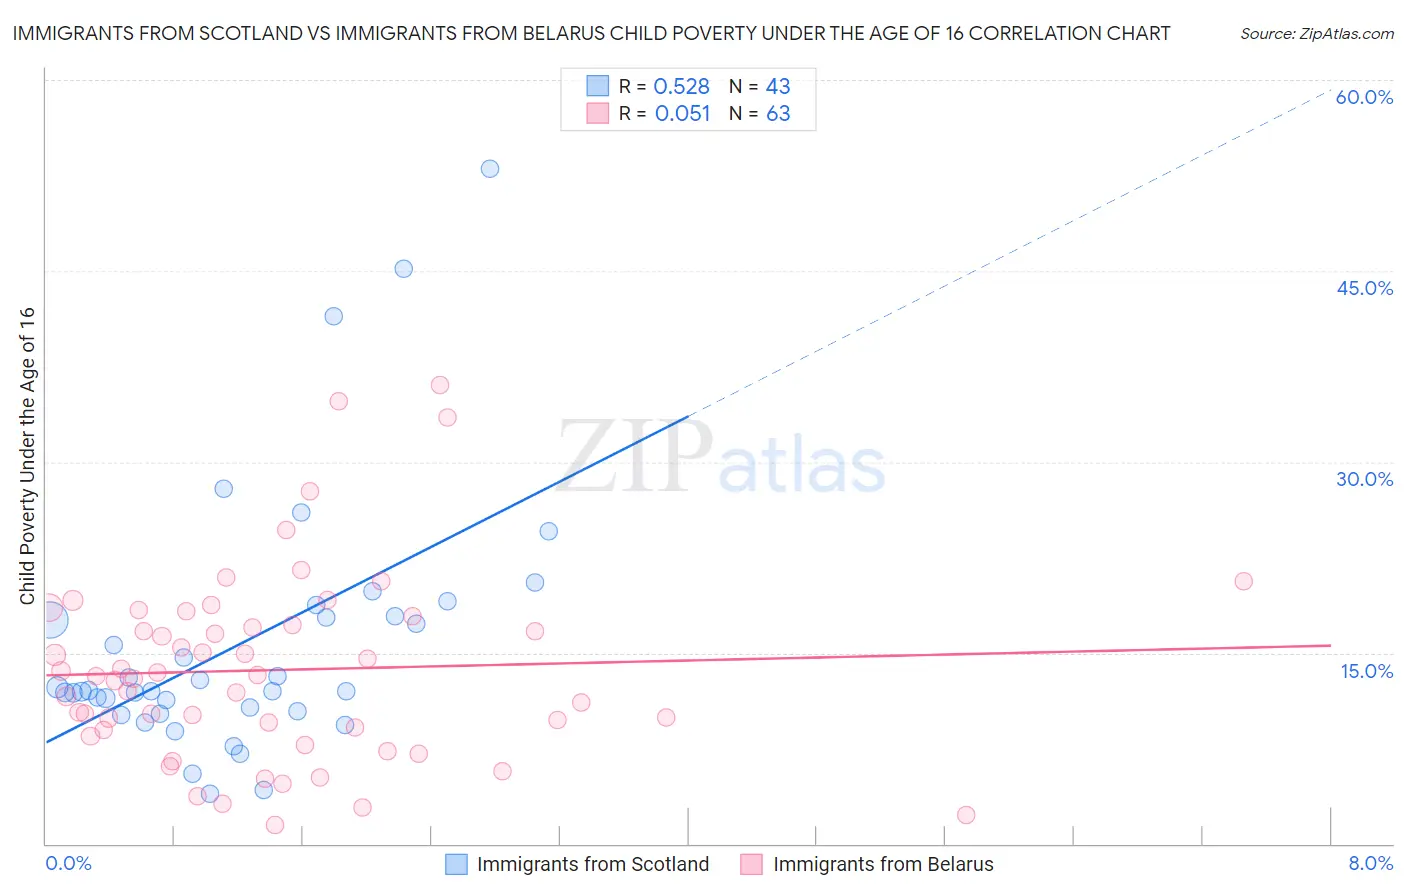 Immigrants from Scotland vs Immigrants from Belarus Child Poverty Under the Age of 16